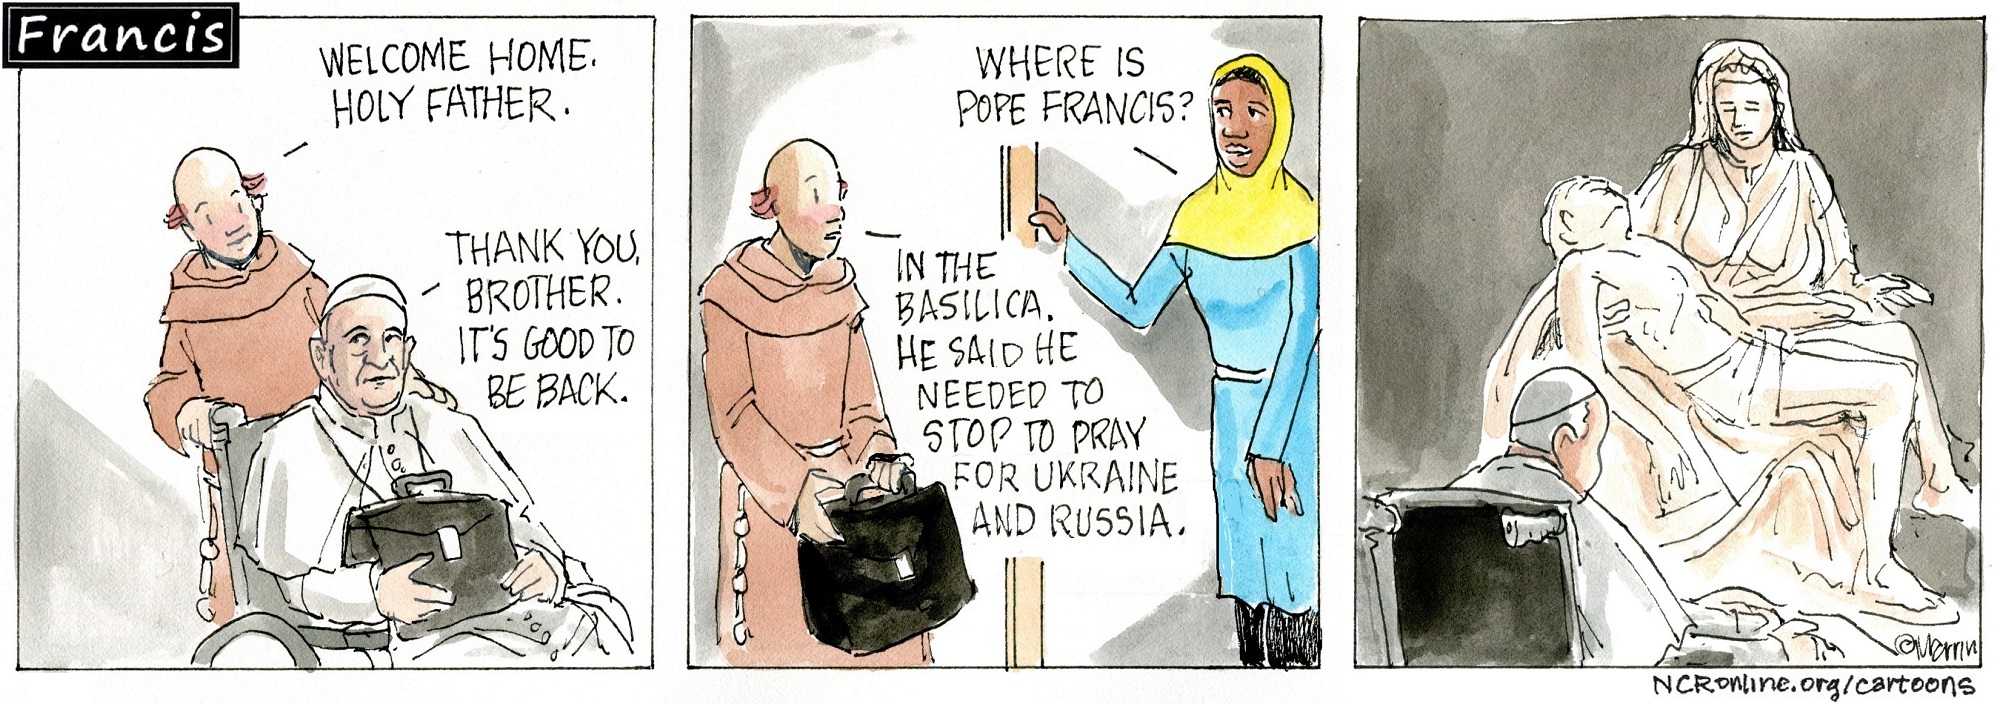 Francis, the comic strip: Francis has an important first task after his return home.